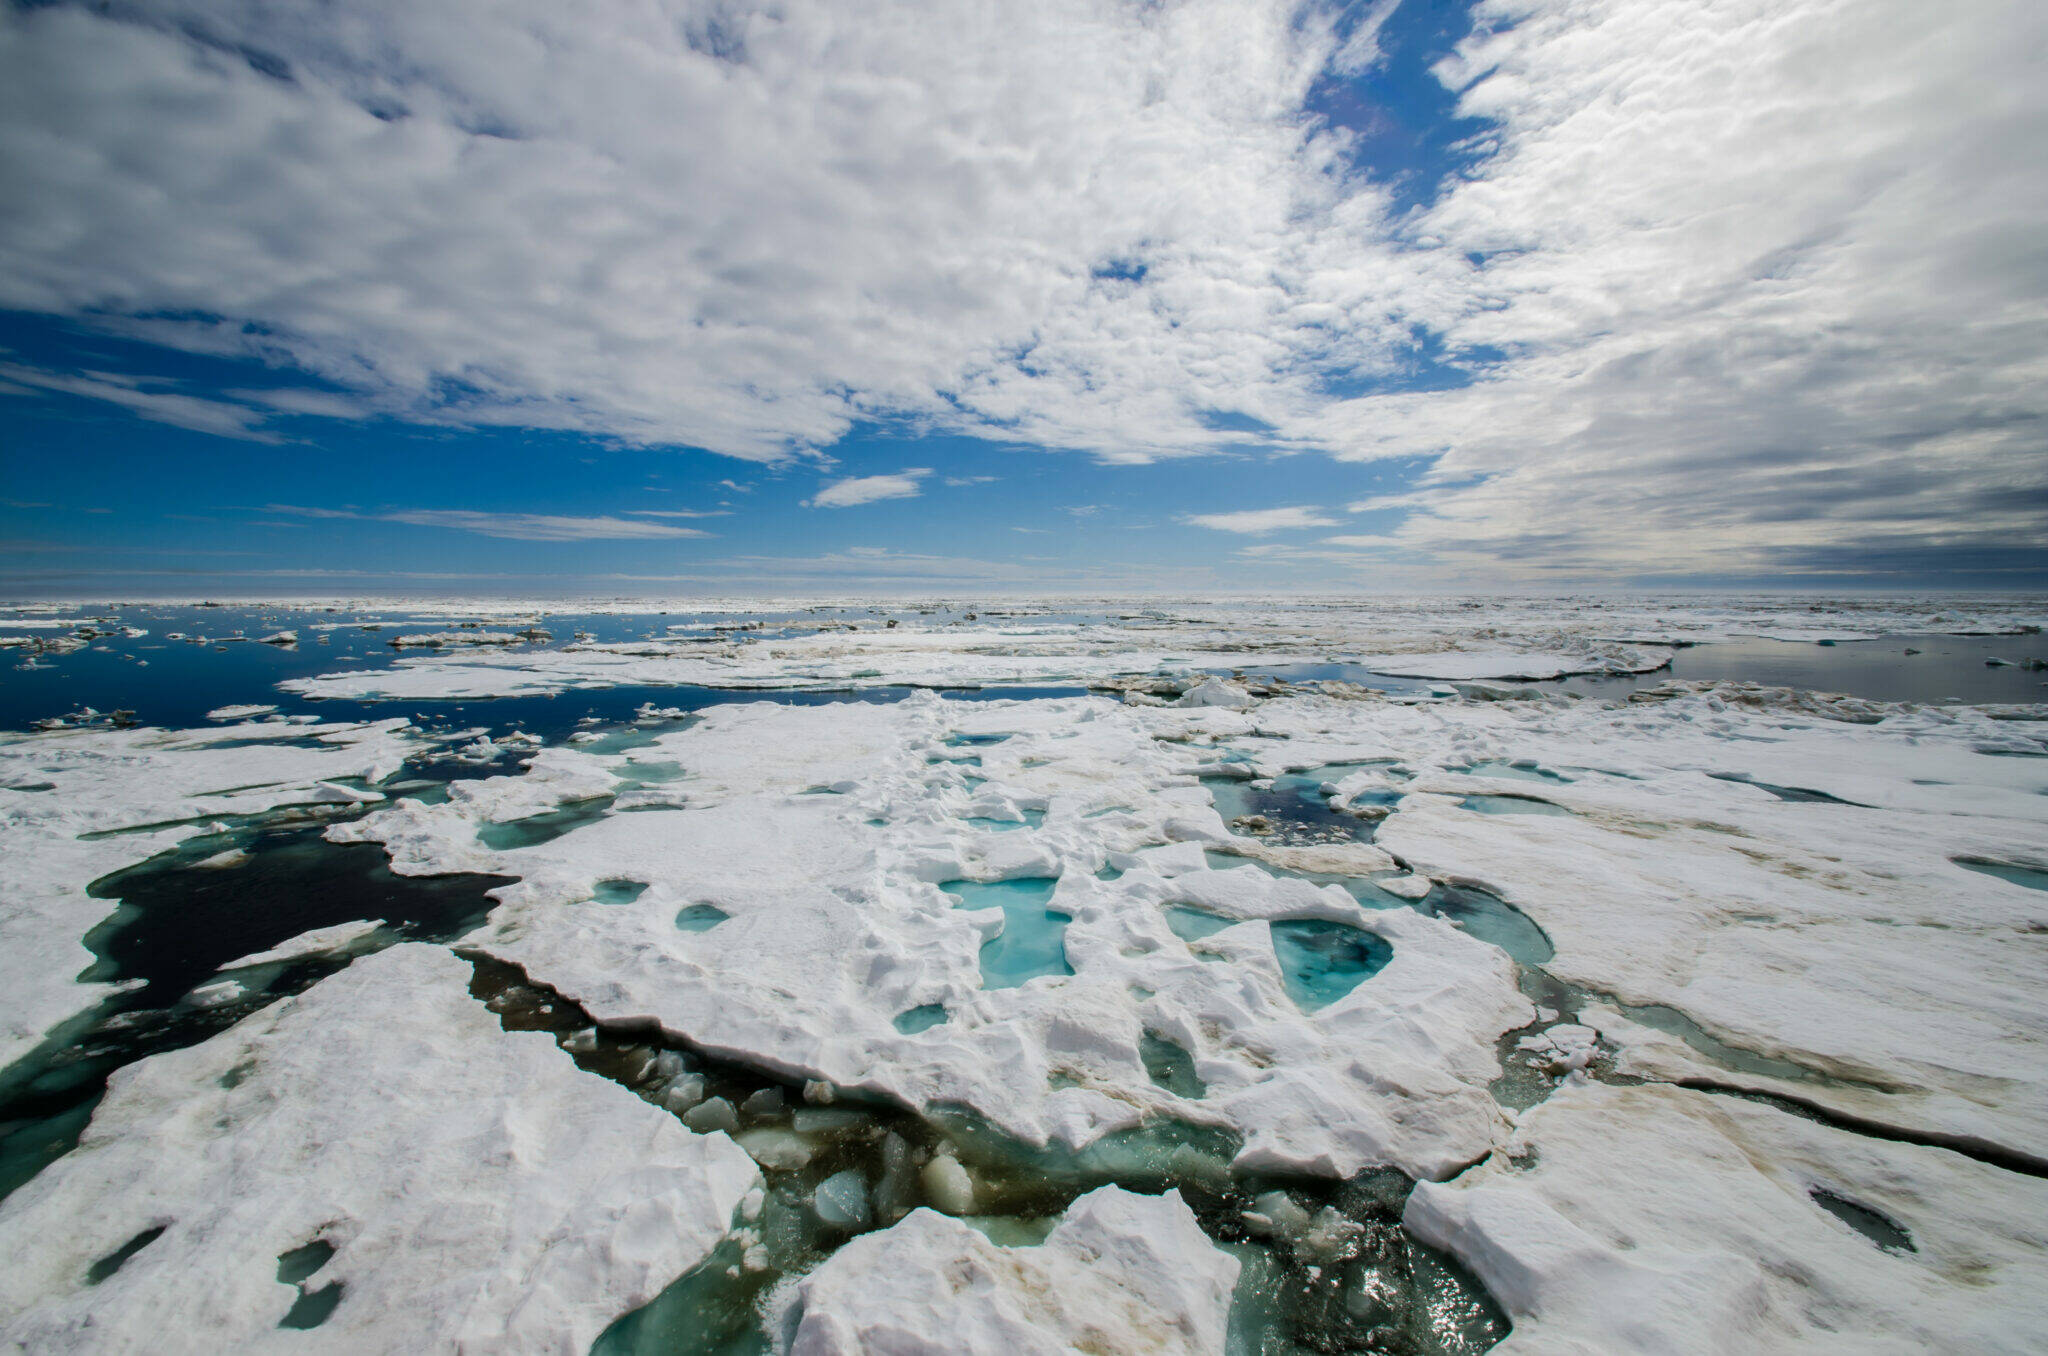 The ocean surface at the Chukchi Borderland is seen on Aug. 10, 2016, from the Coast Guard icebreaking Cutter Healy. At the time, an international and multi-disciplinary team of scientists, media personnel, and educators were conducting a mission to the Arctic’s Chukchi Borderland onboard the U.S. Coast Guard Cutter Healy. That mission, called Hidden Ocean 2016, was among the many scientific voyages conducted by the Healy in the Arctic each summer and fall. The Chukchi Borderland is an area of complex underwater topography located about 600 miles north of the Bering Strait. The area is part of the large swath of newly mapped extended continental shelf in the Arctic where the U.S. is seeking to assert sovereignty. (Photo provided by National Oceanic and Atmospheric Administration)